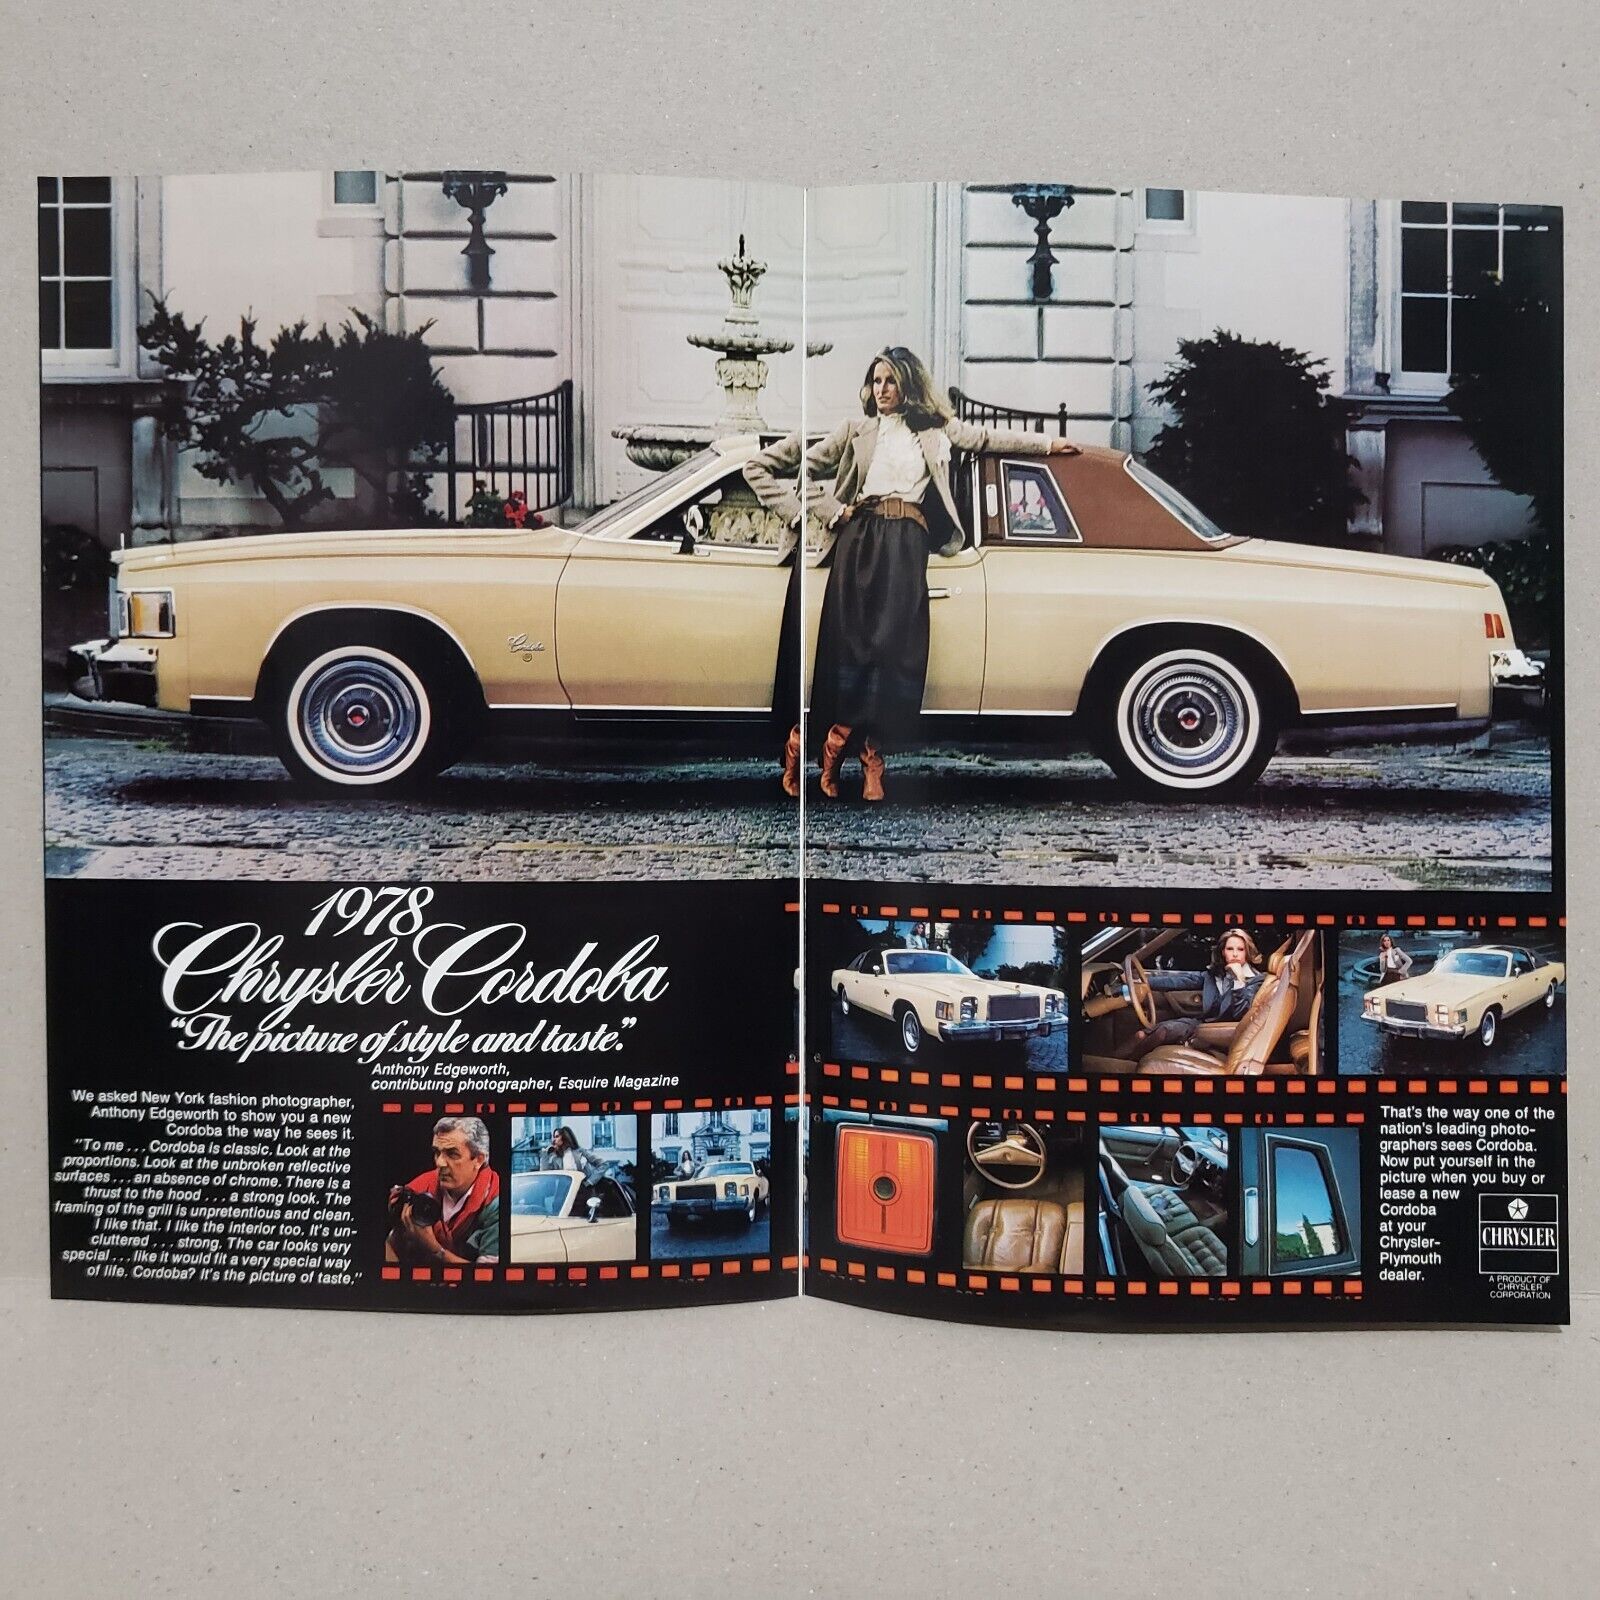 1978 Chrysler Cordoba Classic Car Print Ad Centerfold Picture of Style and Taste